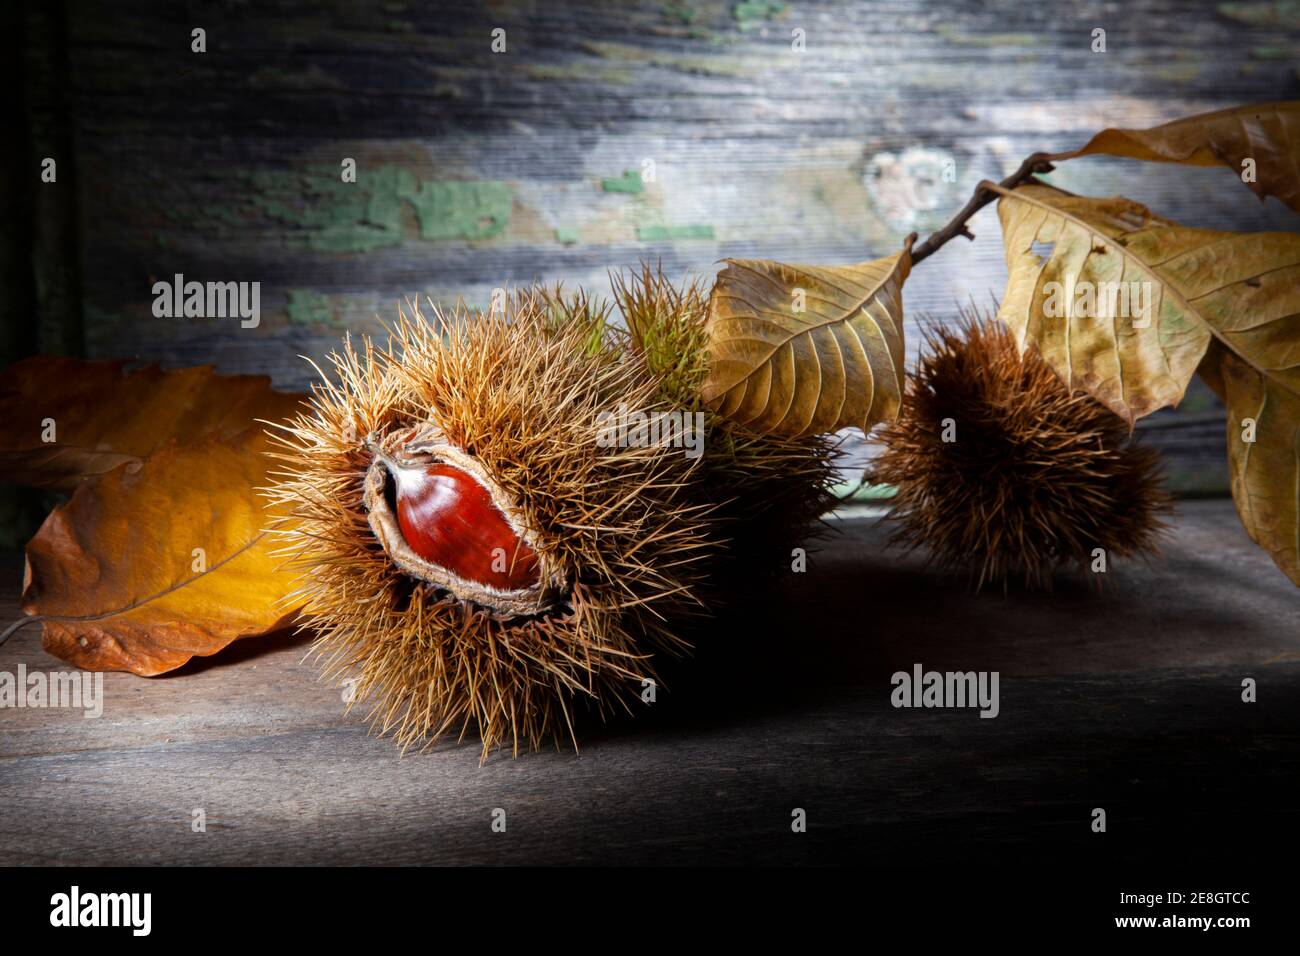 Autumn Still Life of Chestnut With Dried Leaves and Shells. Macro Photo of  On Wooden Table With Decayed Background. Taken With Spotlight in Studio Stock Photo